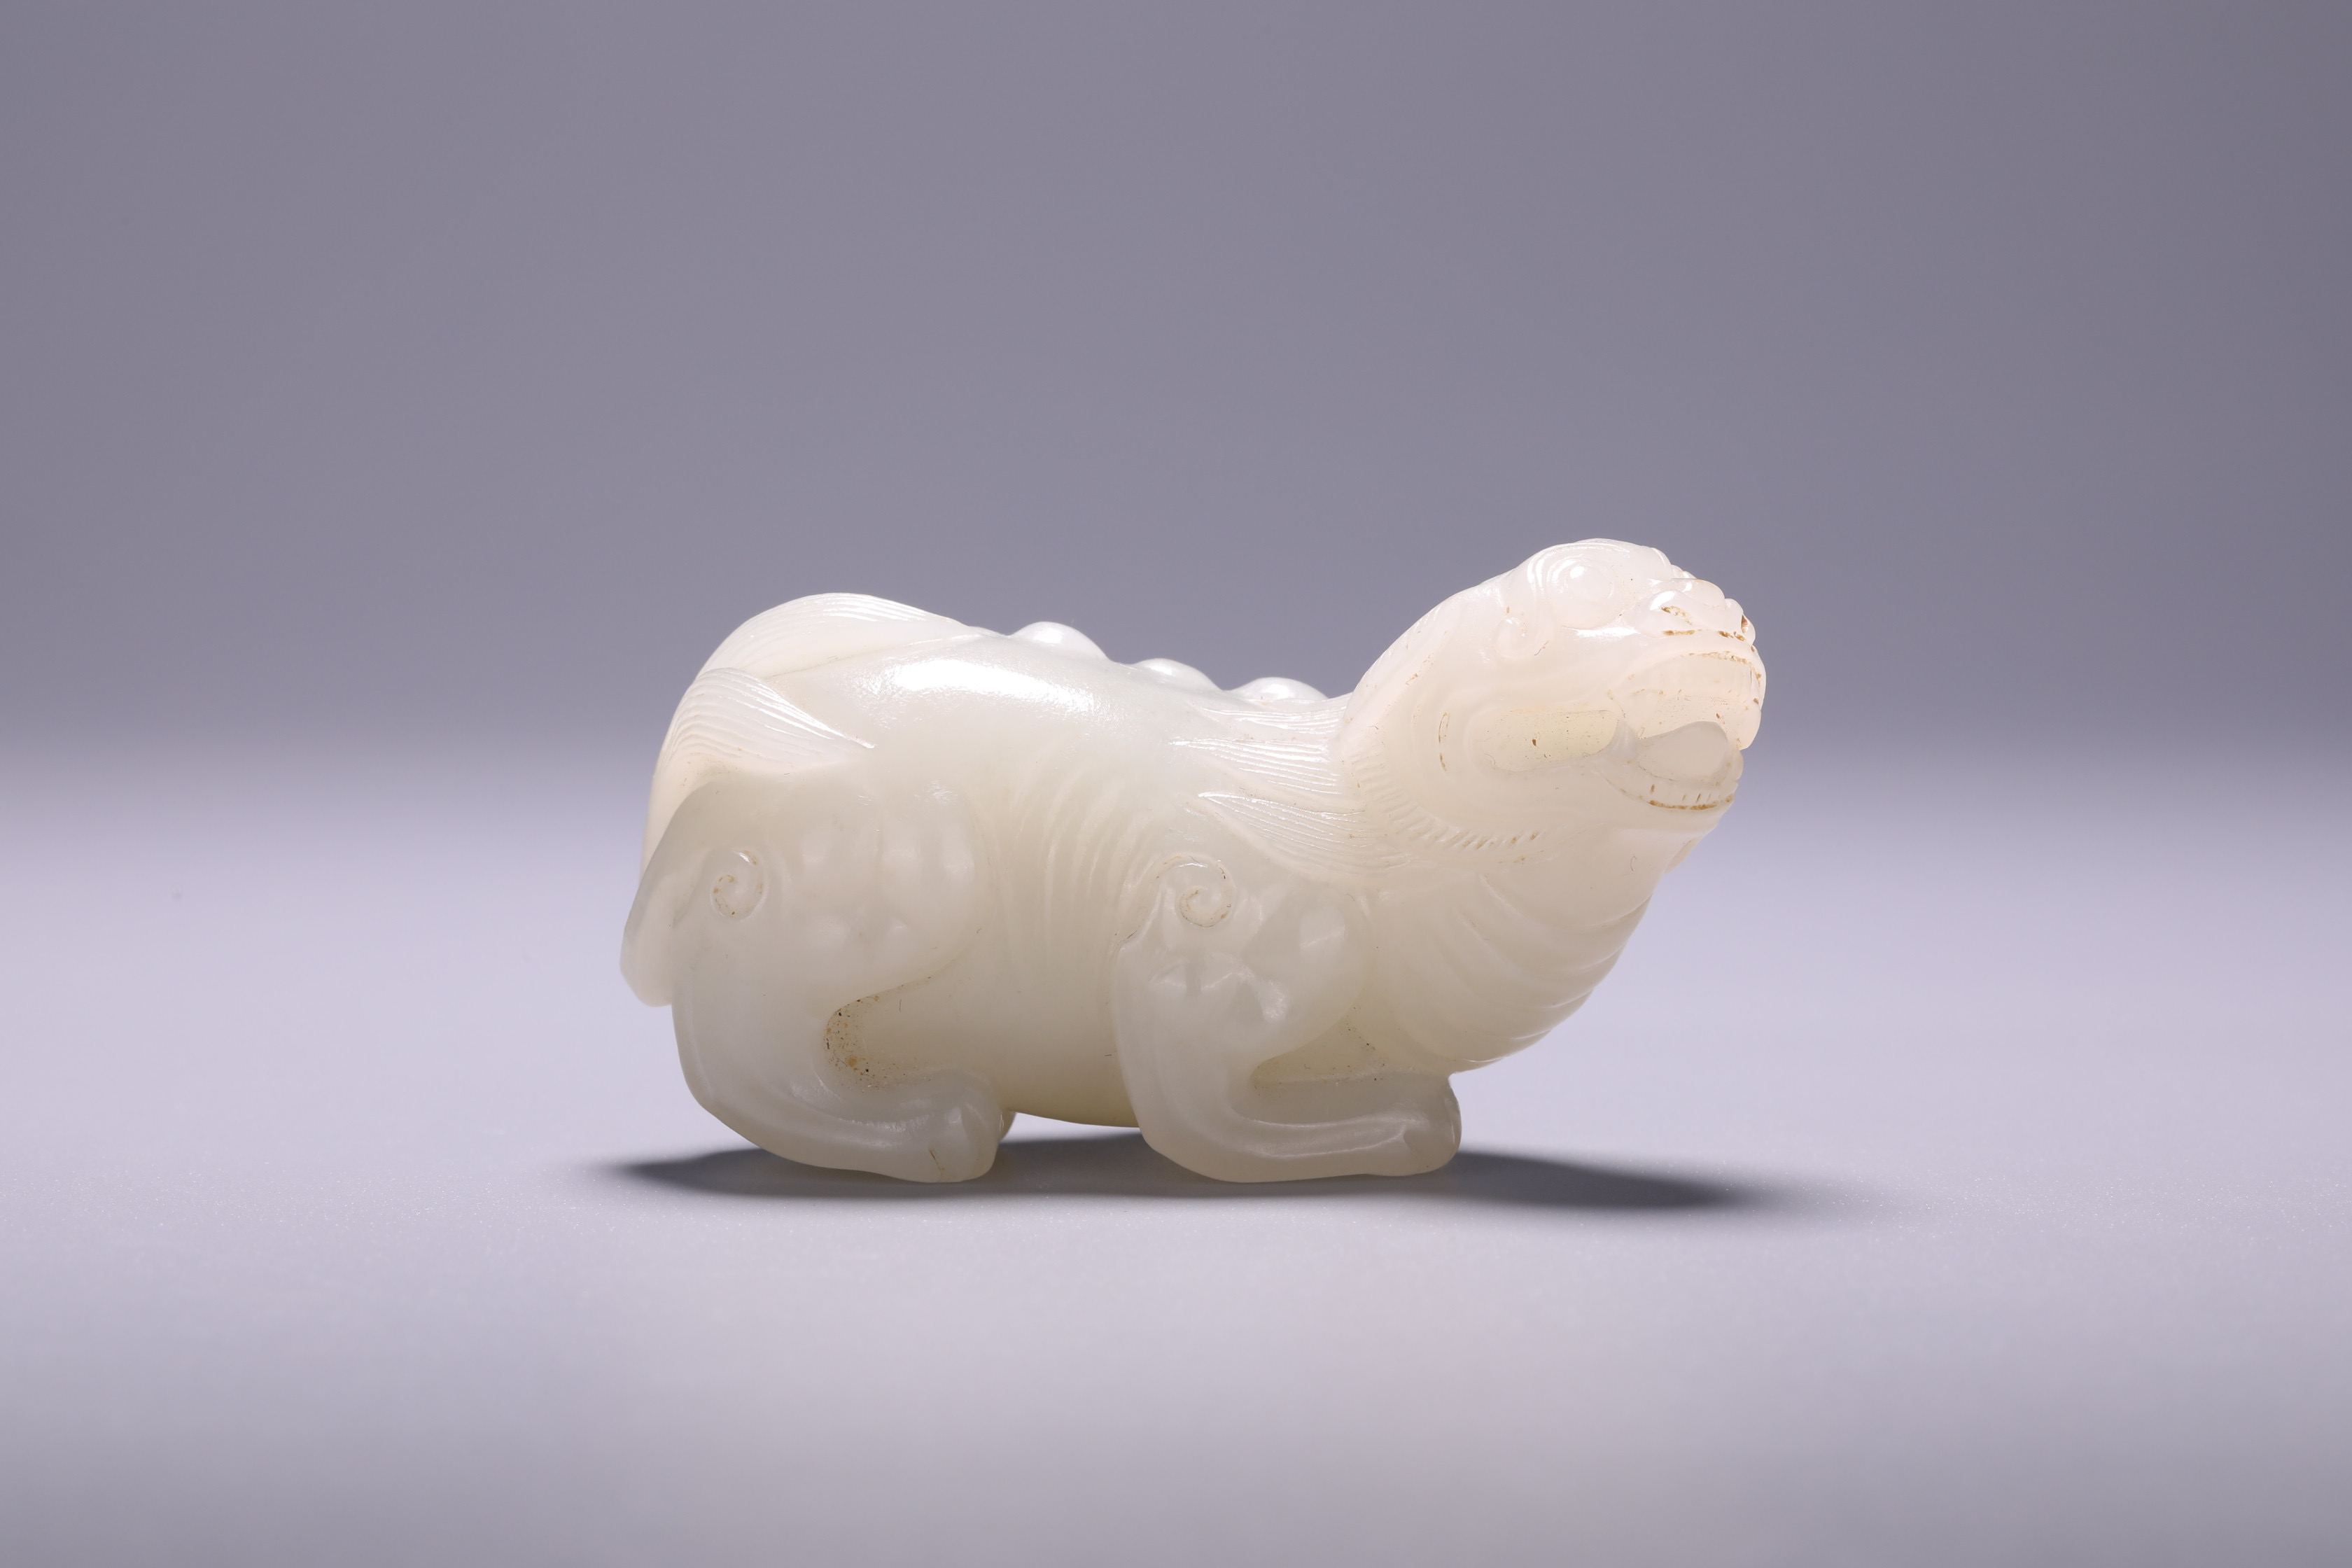 A Chinese jade 'Mythical Beast' carving, L 6,5 - H 3,5 cm